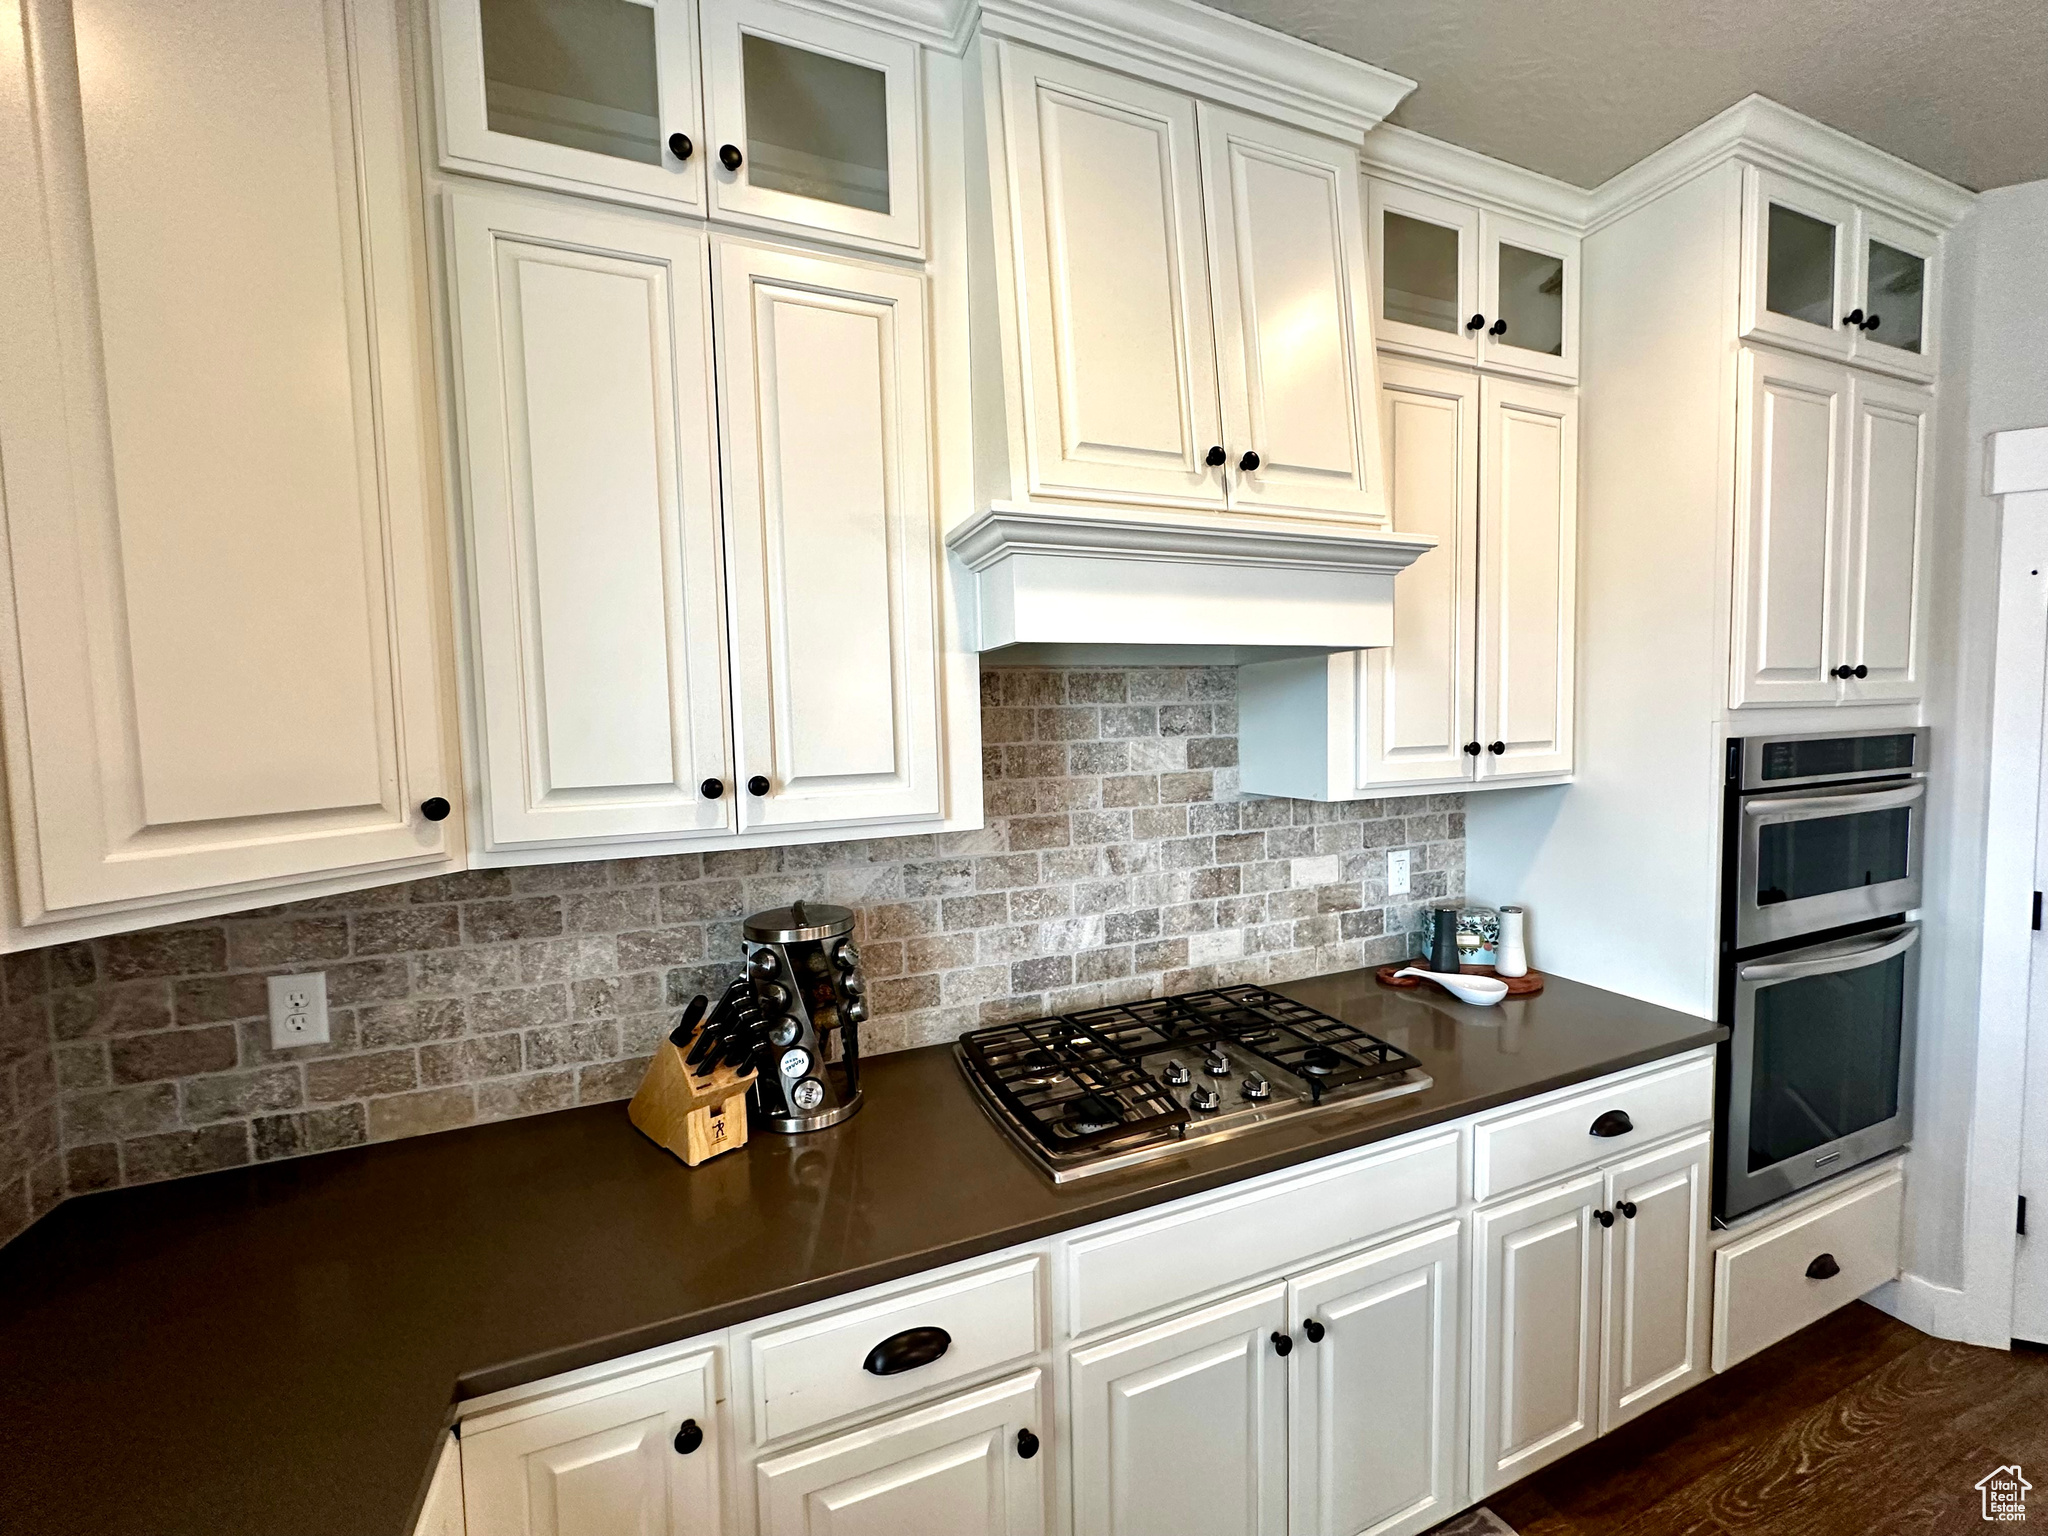 Kitchen with white cabinets, dark hardwood / wood-style floors, appliances with stainless steel finishes, and backsplash